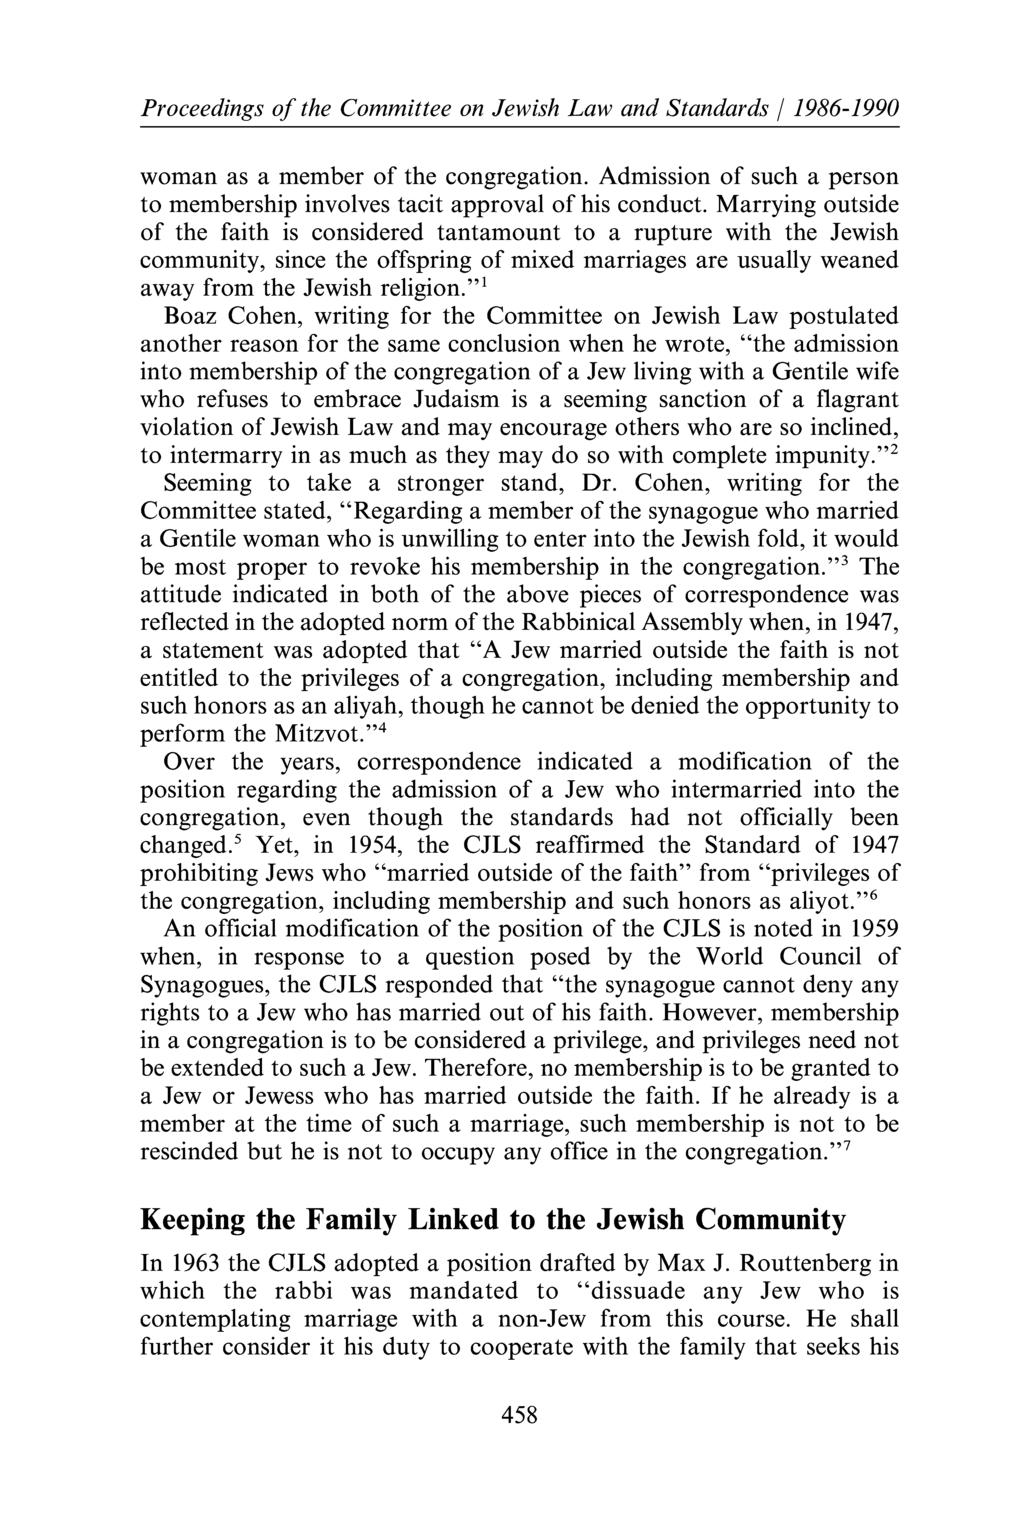 Proceedings of the Committee on Jewish Law and Standards/ 1986-1990 woman as a member of the congregation. Admission of such a person to membership involves tacit approval of his conduct.